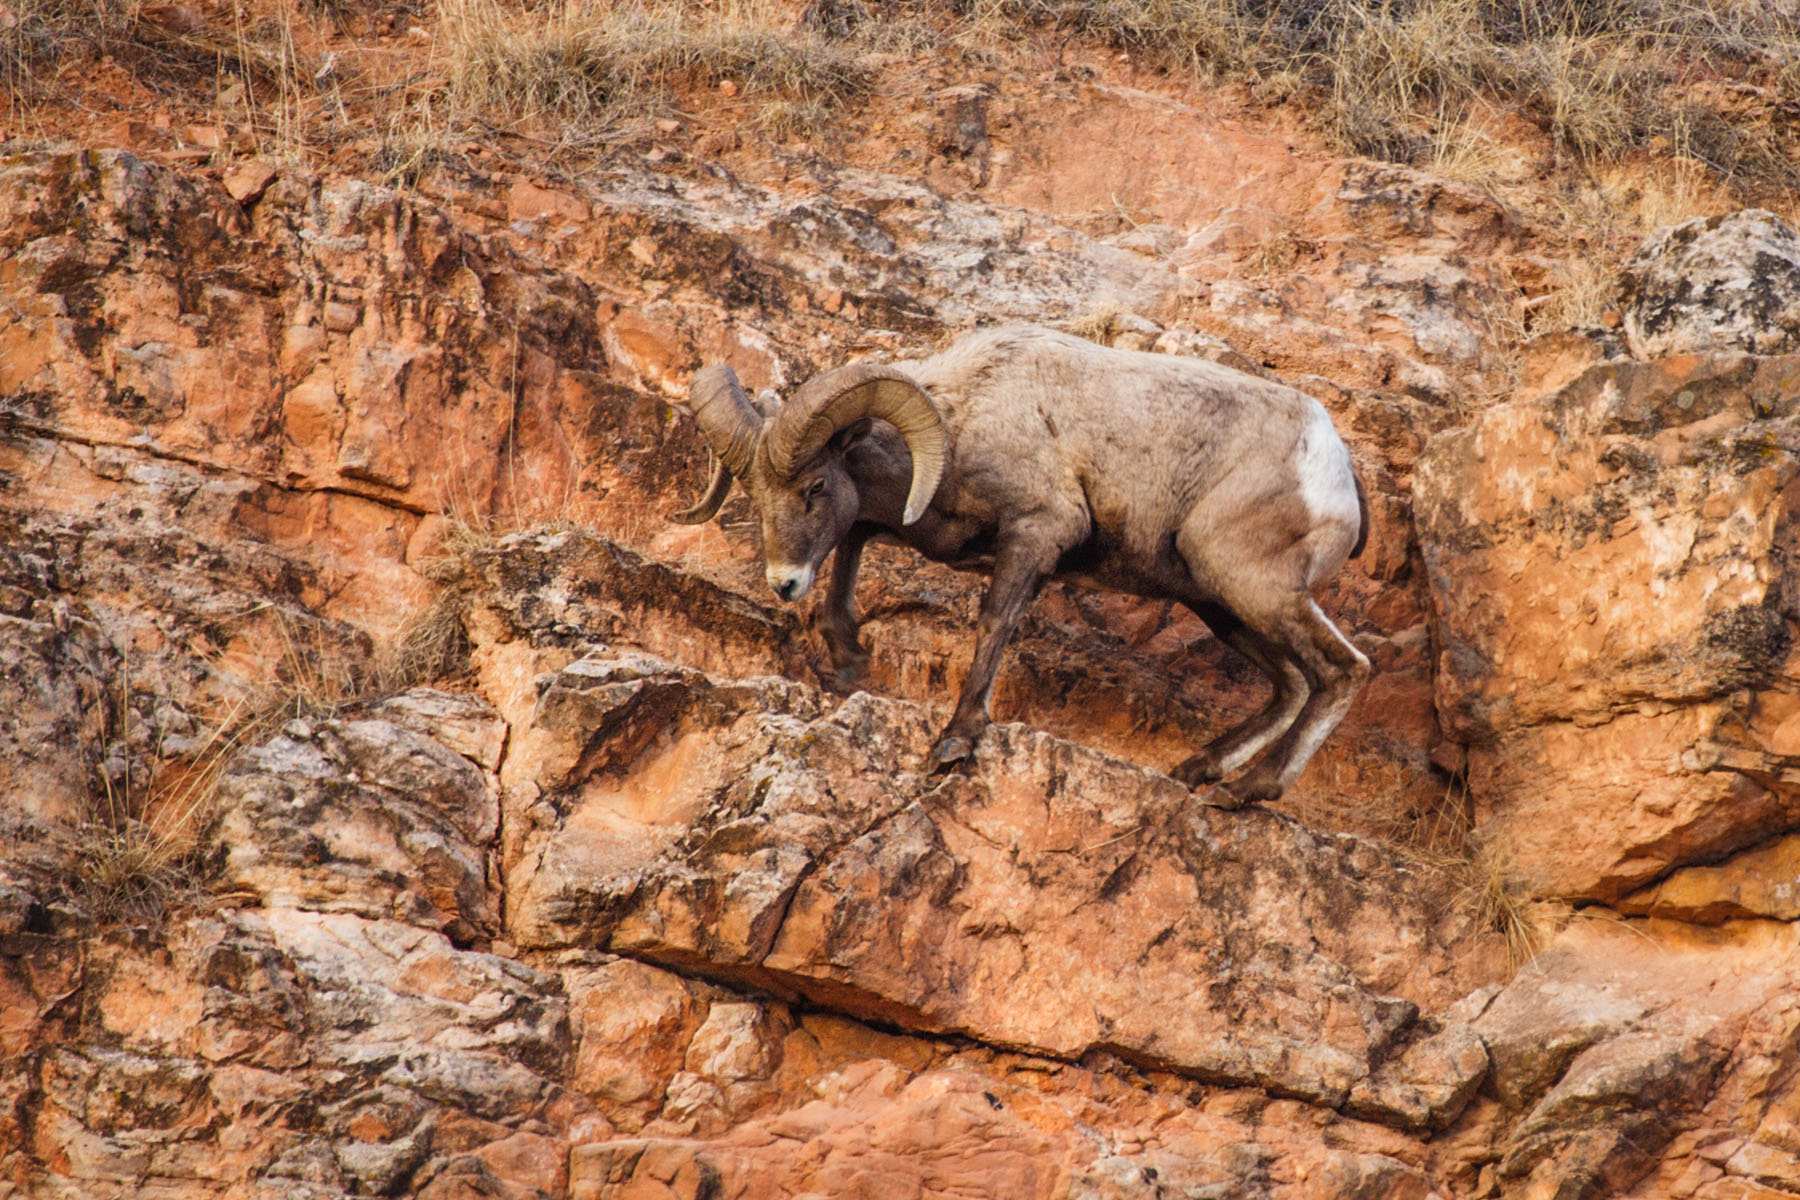 Sure-footed bighorn sheep bobbled jumping to here, jumped back down and tried again.  Cleghorn Canyon, Rapid City, SD.  Click for next photo.